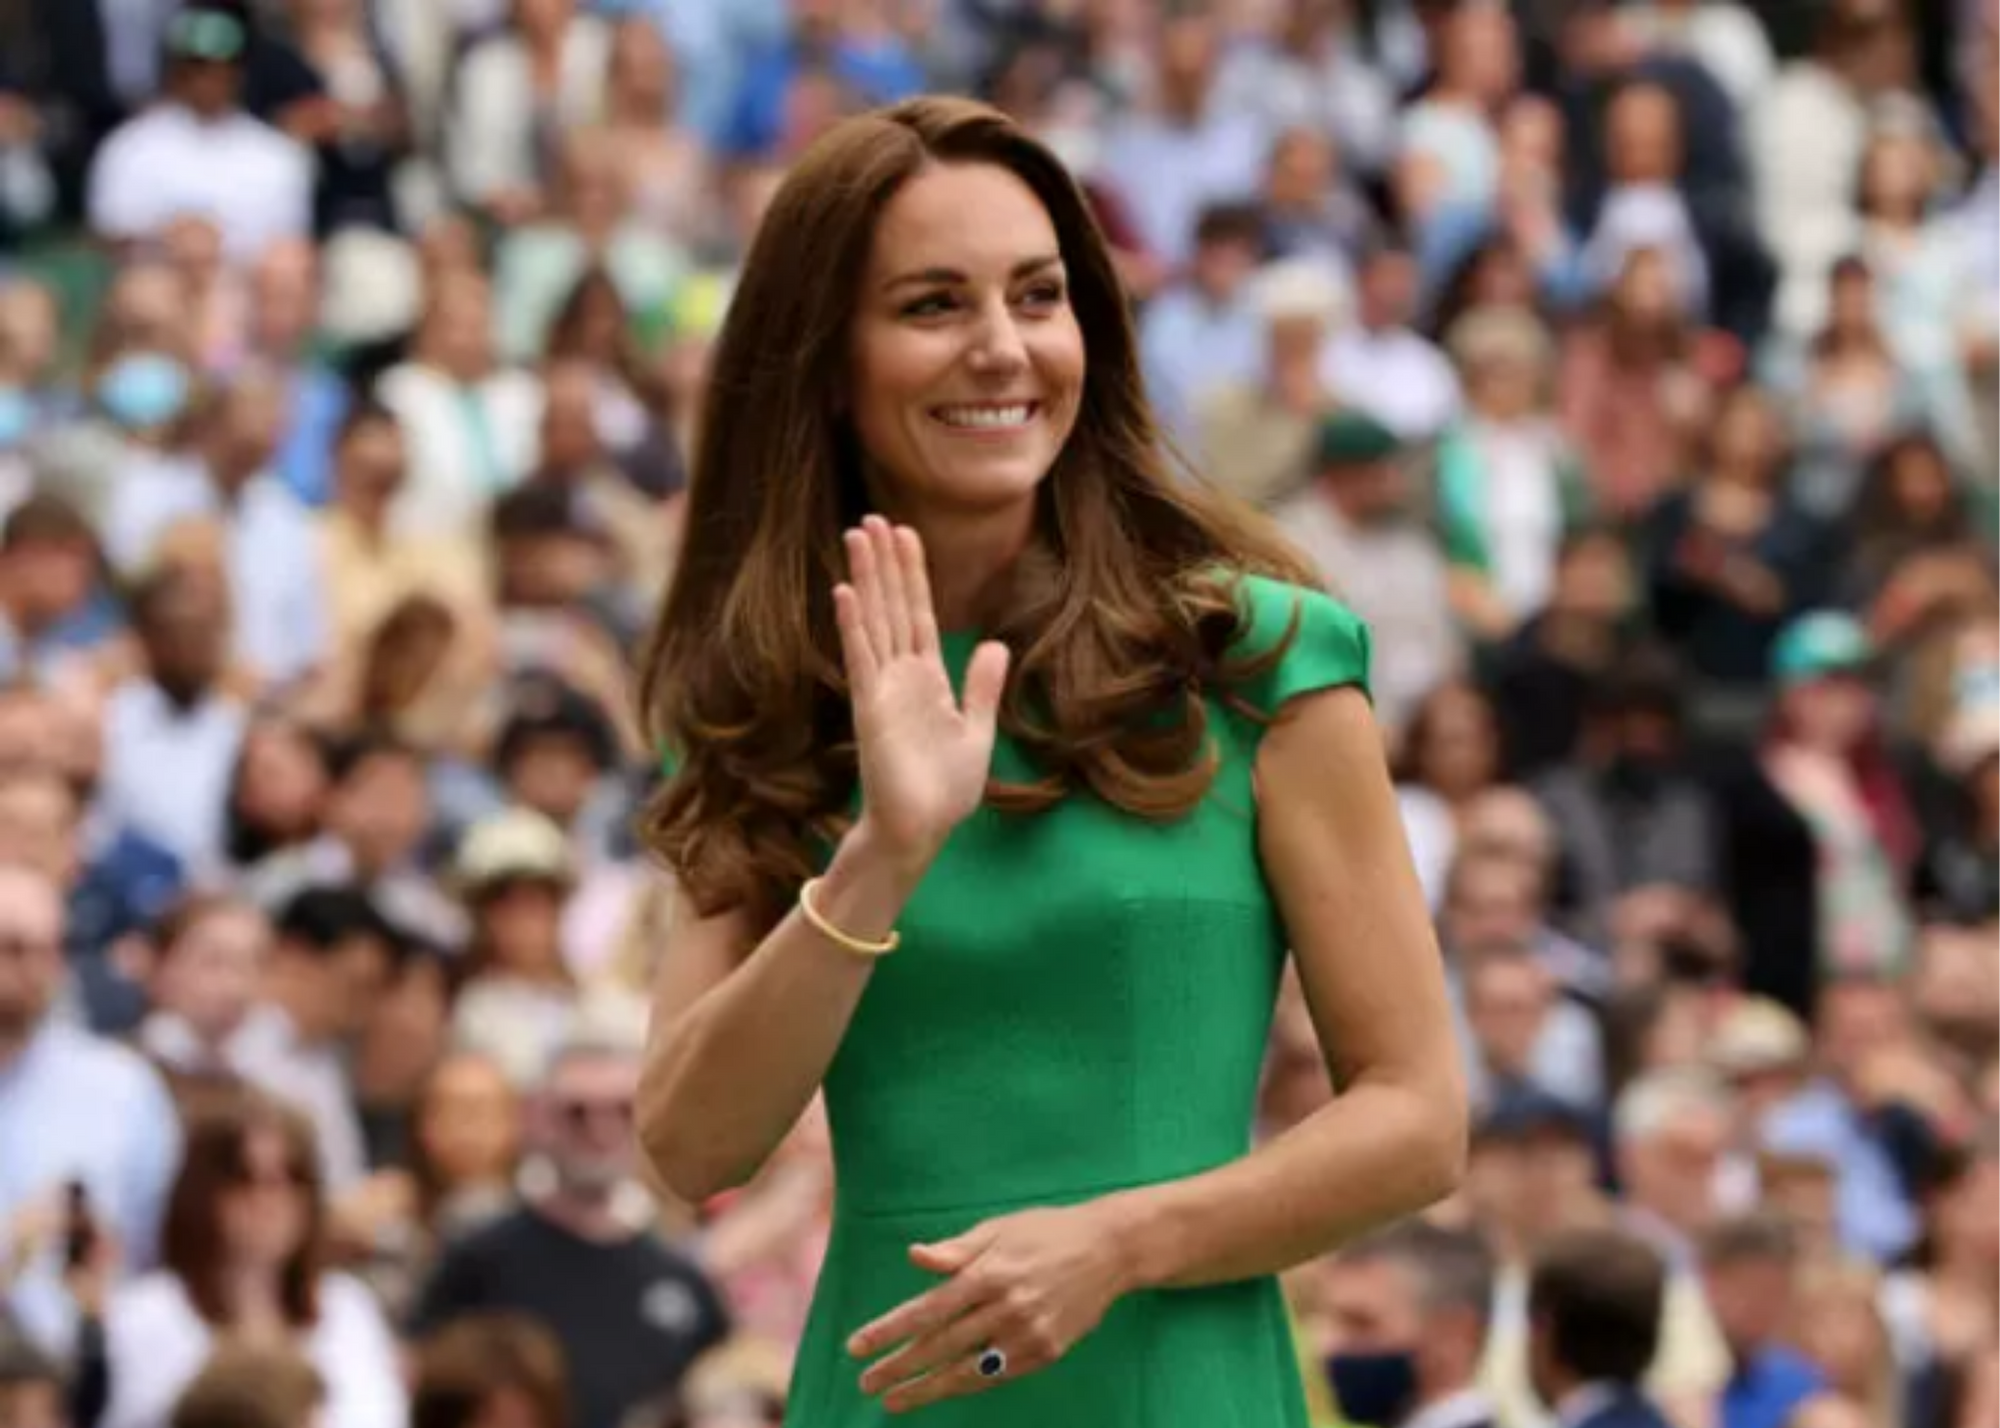 Kate Middleton is dressed in a green gown and waves to the crowd